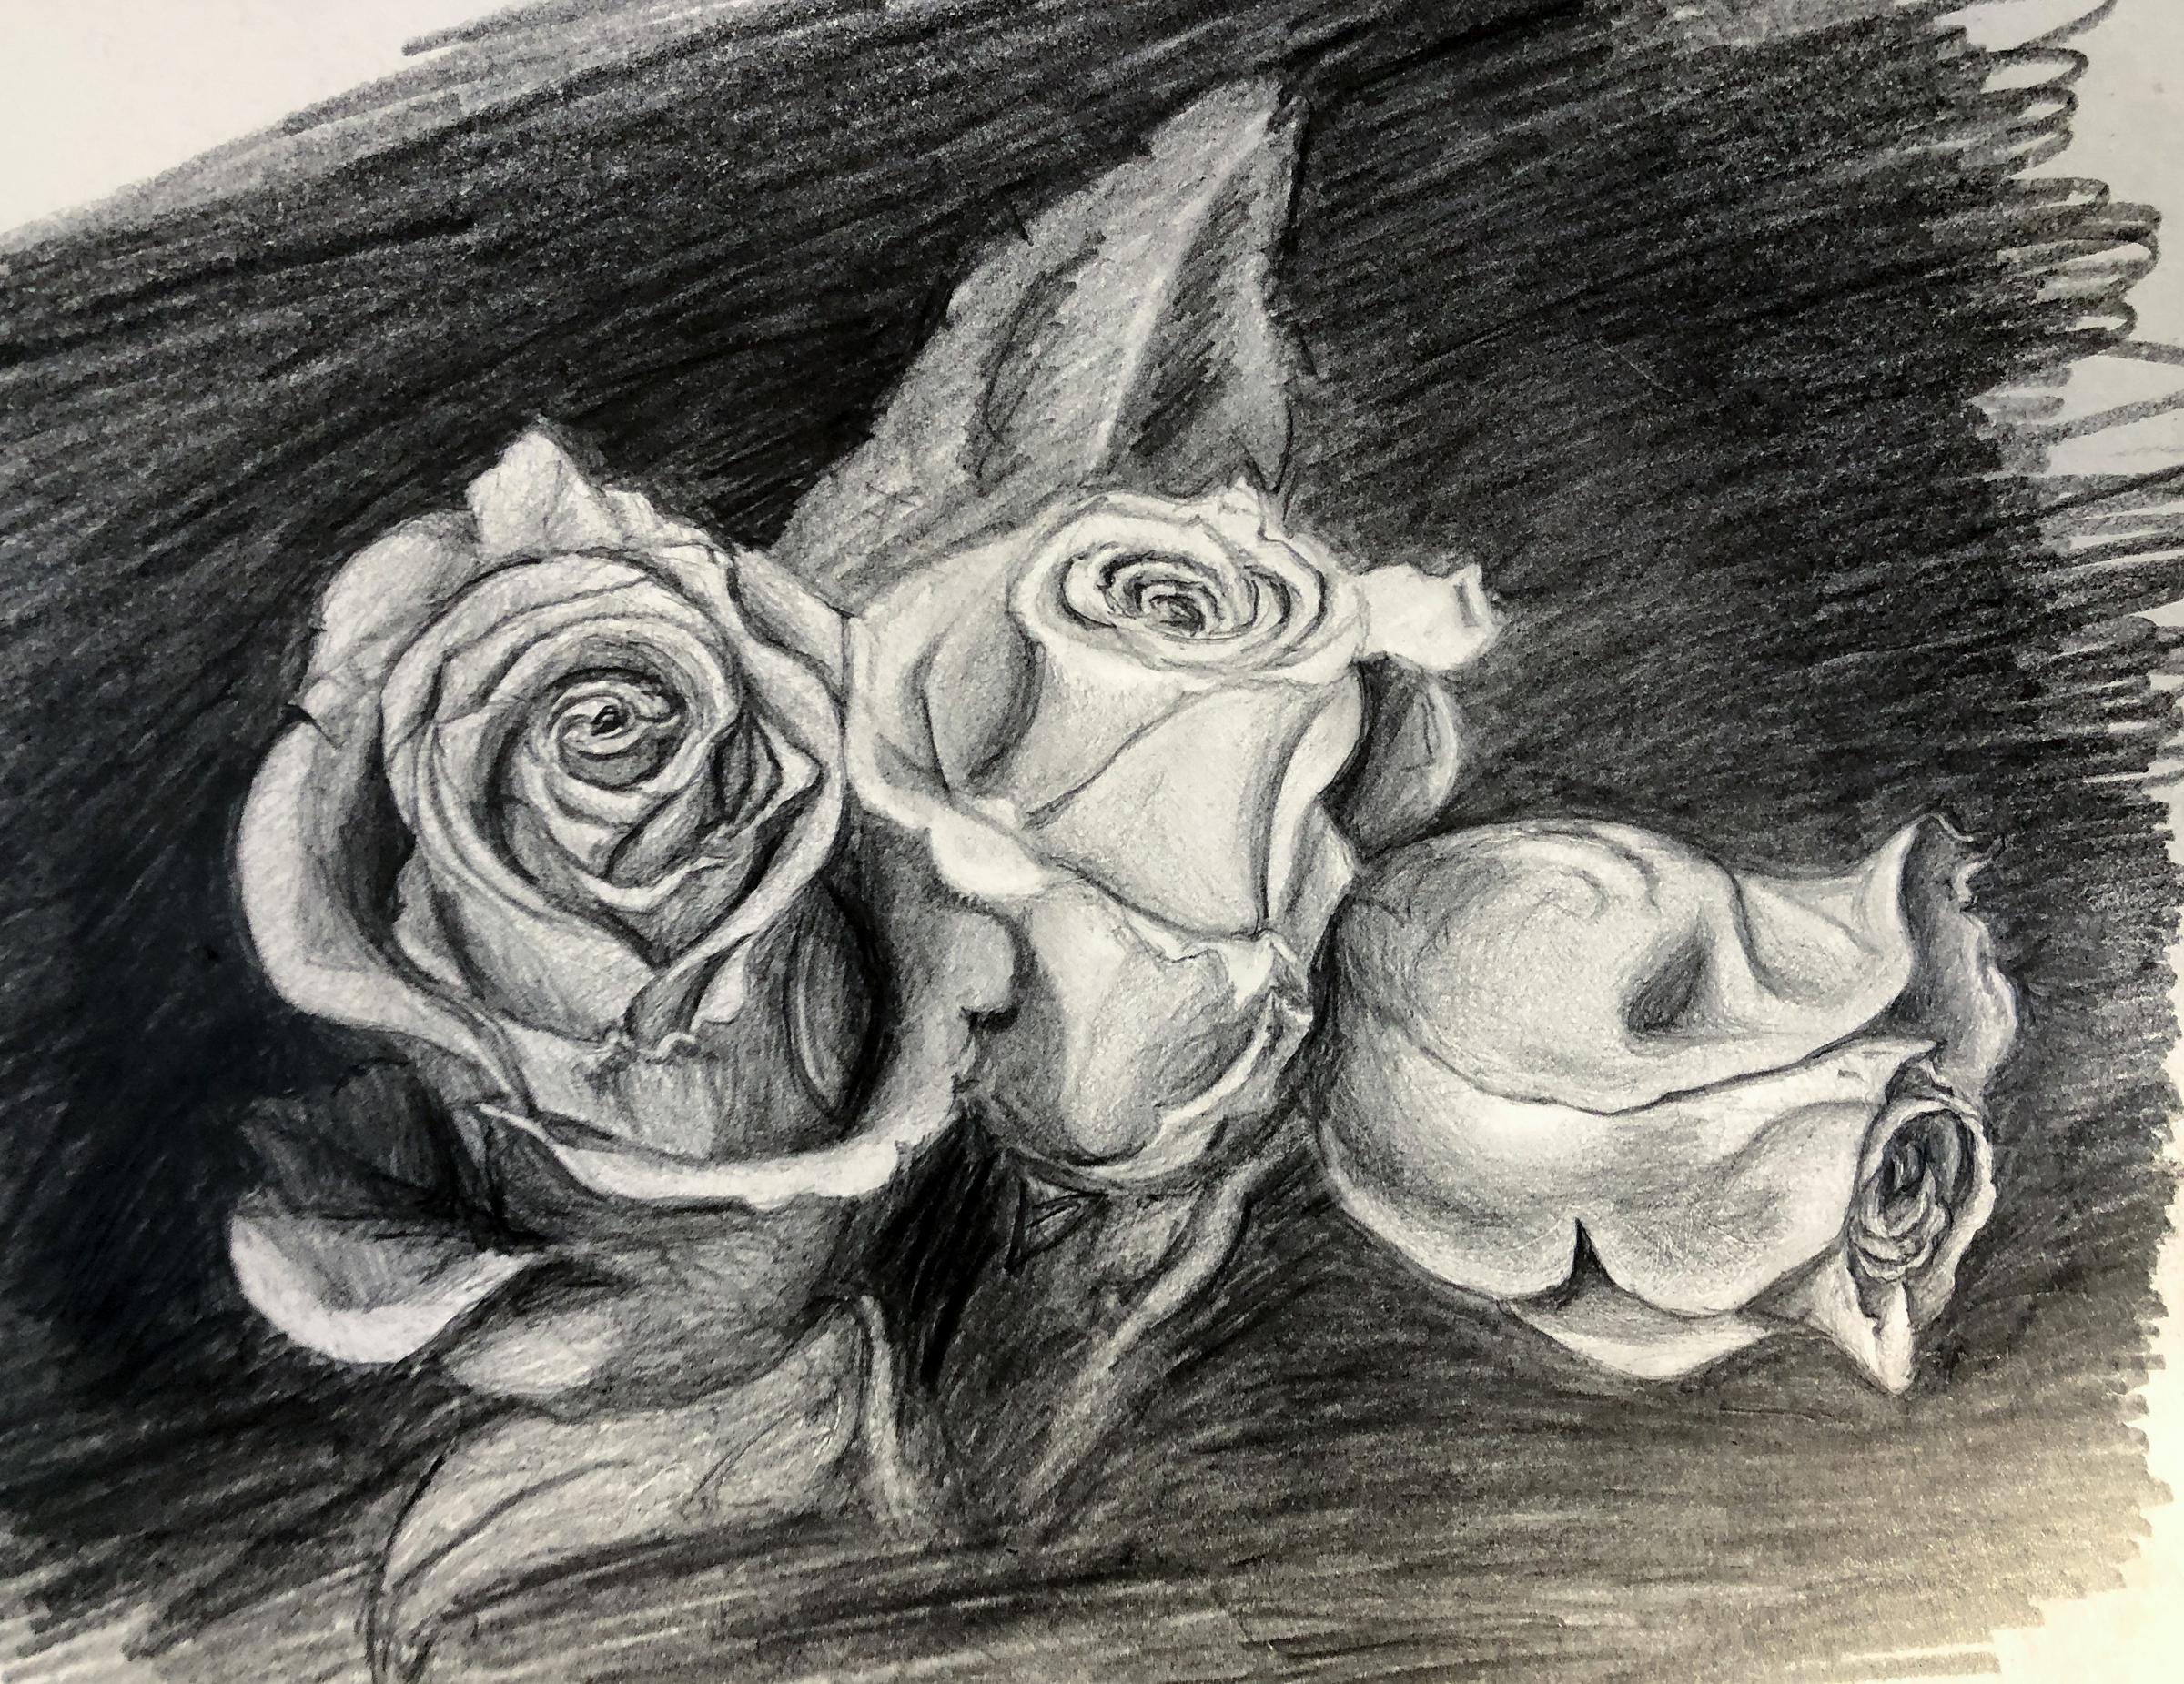 pencil drawing of 3 roses by Tom Schmidt